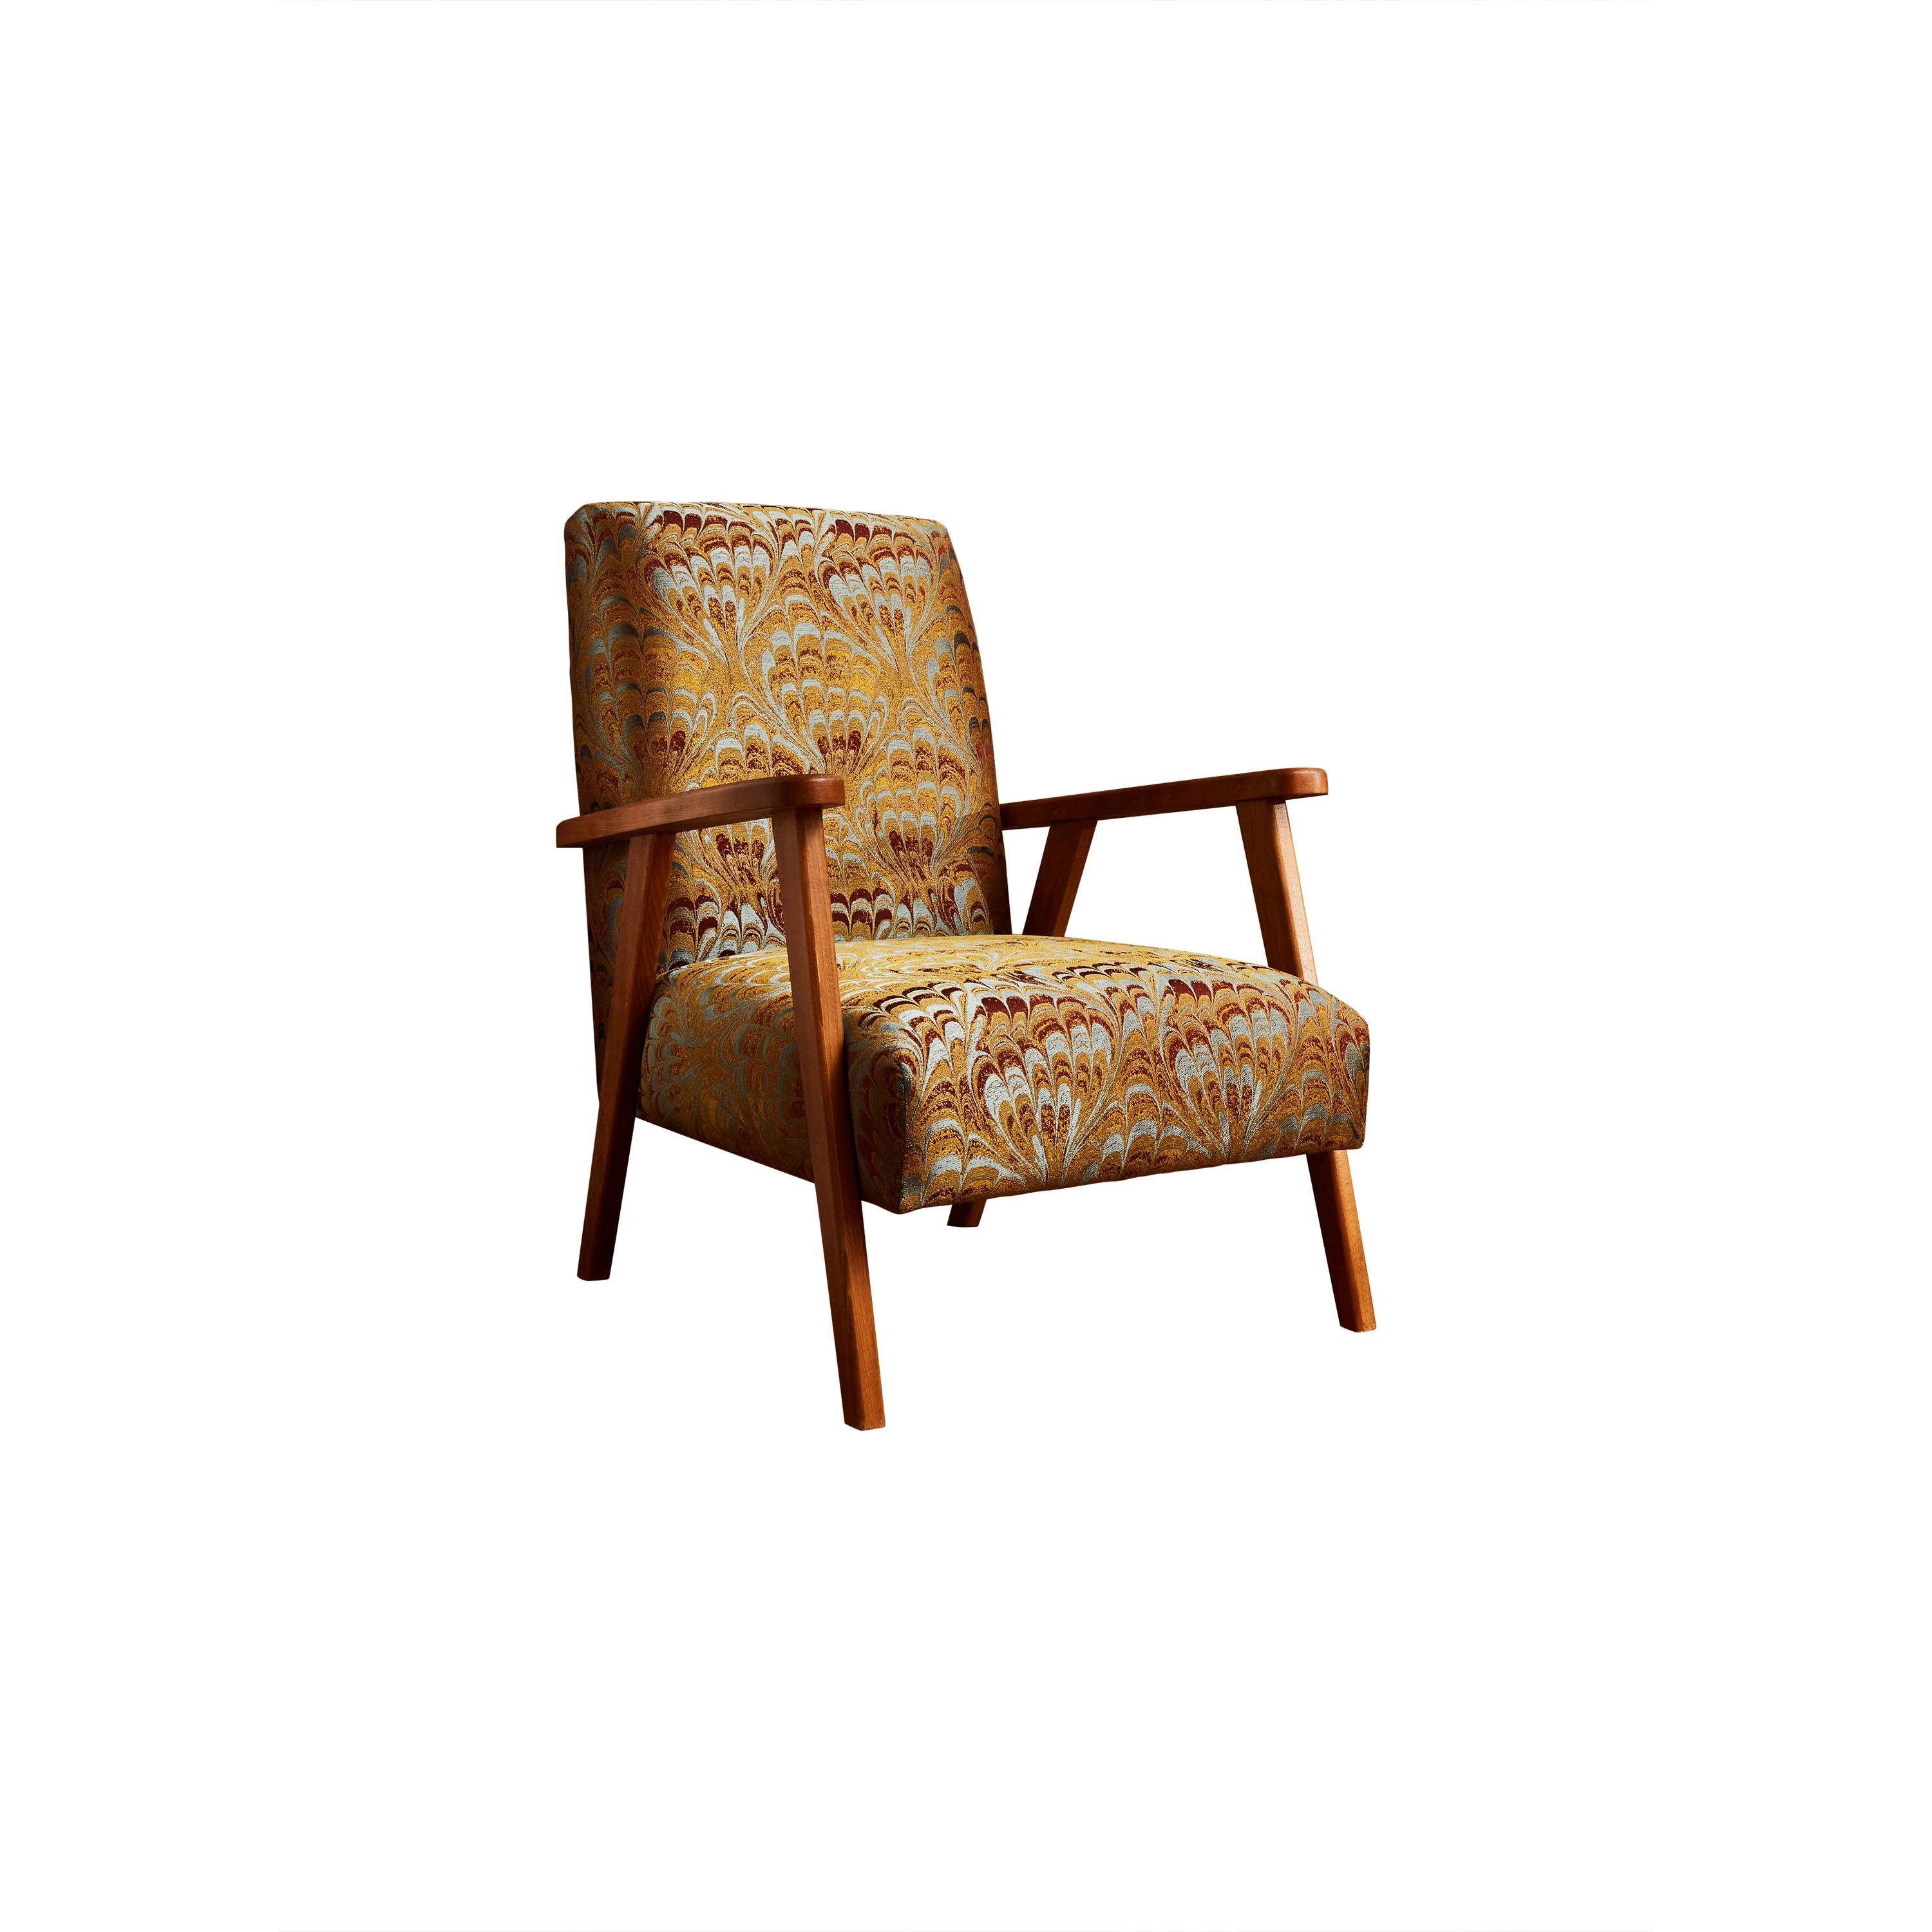 Pair of French vintage armchairs, restored and reupholstered with a 